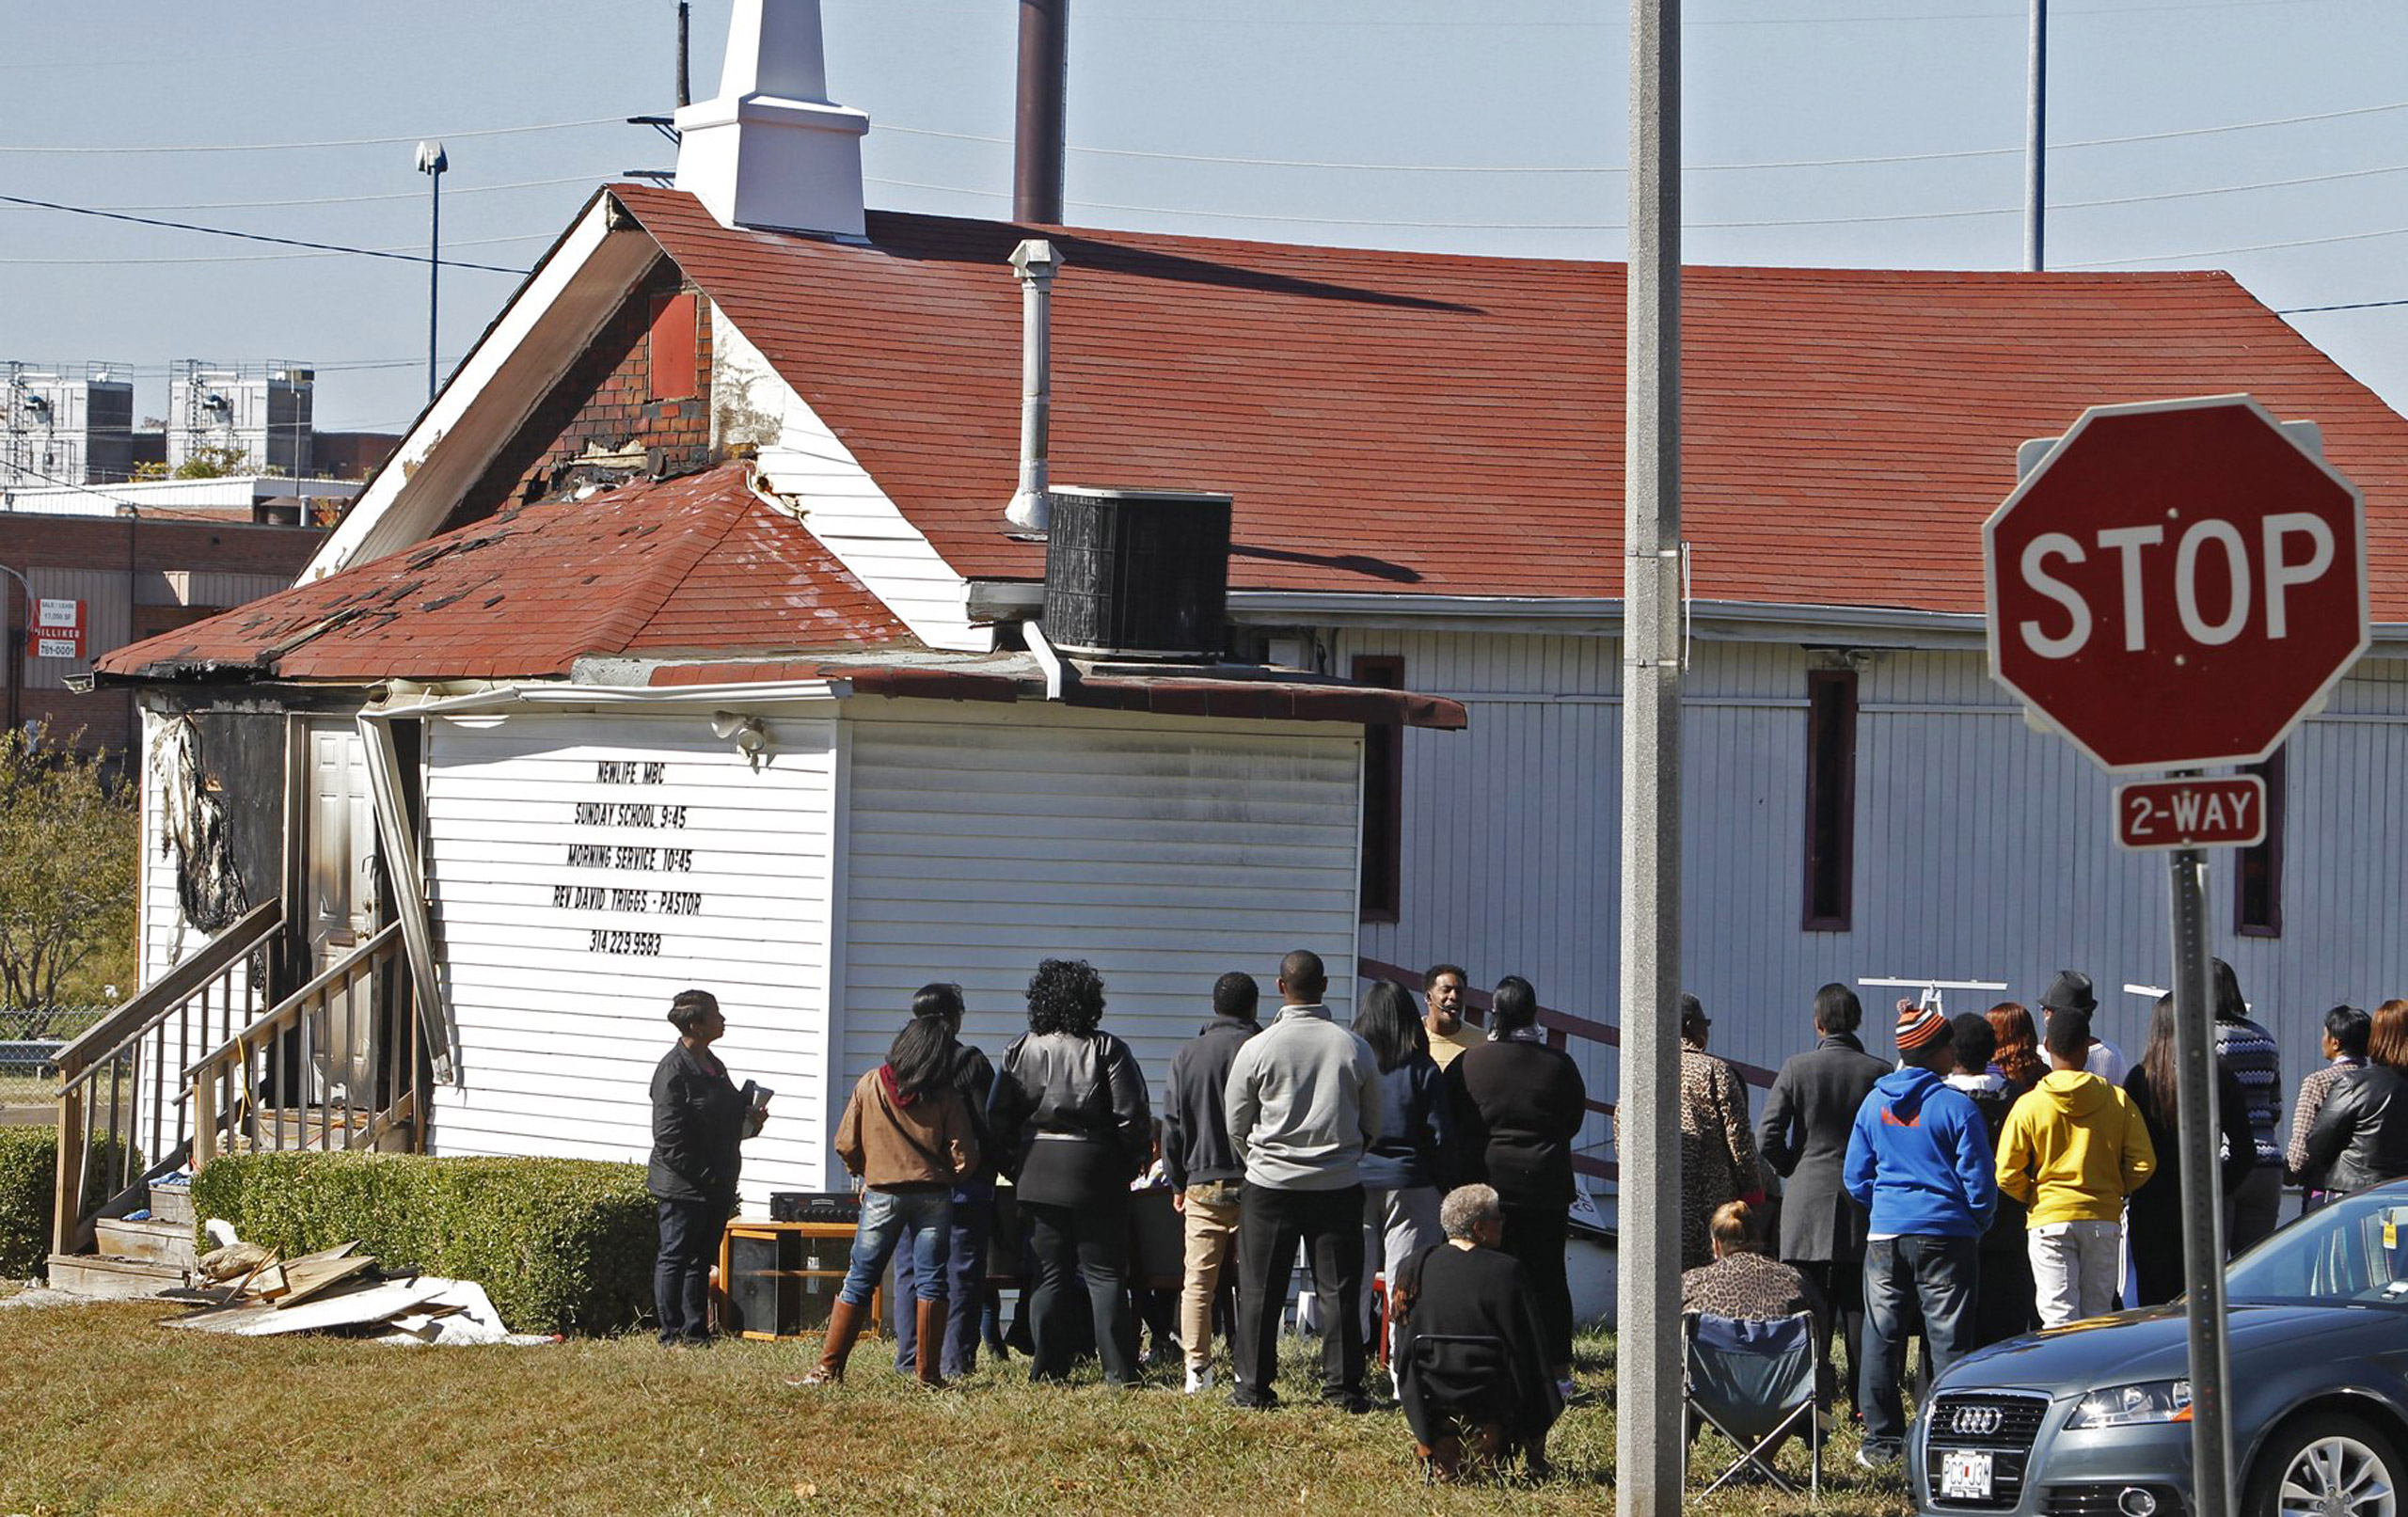 An outdoor service is held following a fire at the New Life Missionary Baptist Church in St. Louis on Oct. 18, 2015. (J.B. Forbes—St. Louis Post-Dispatch/AP)